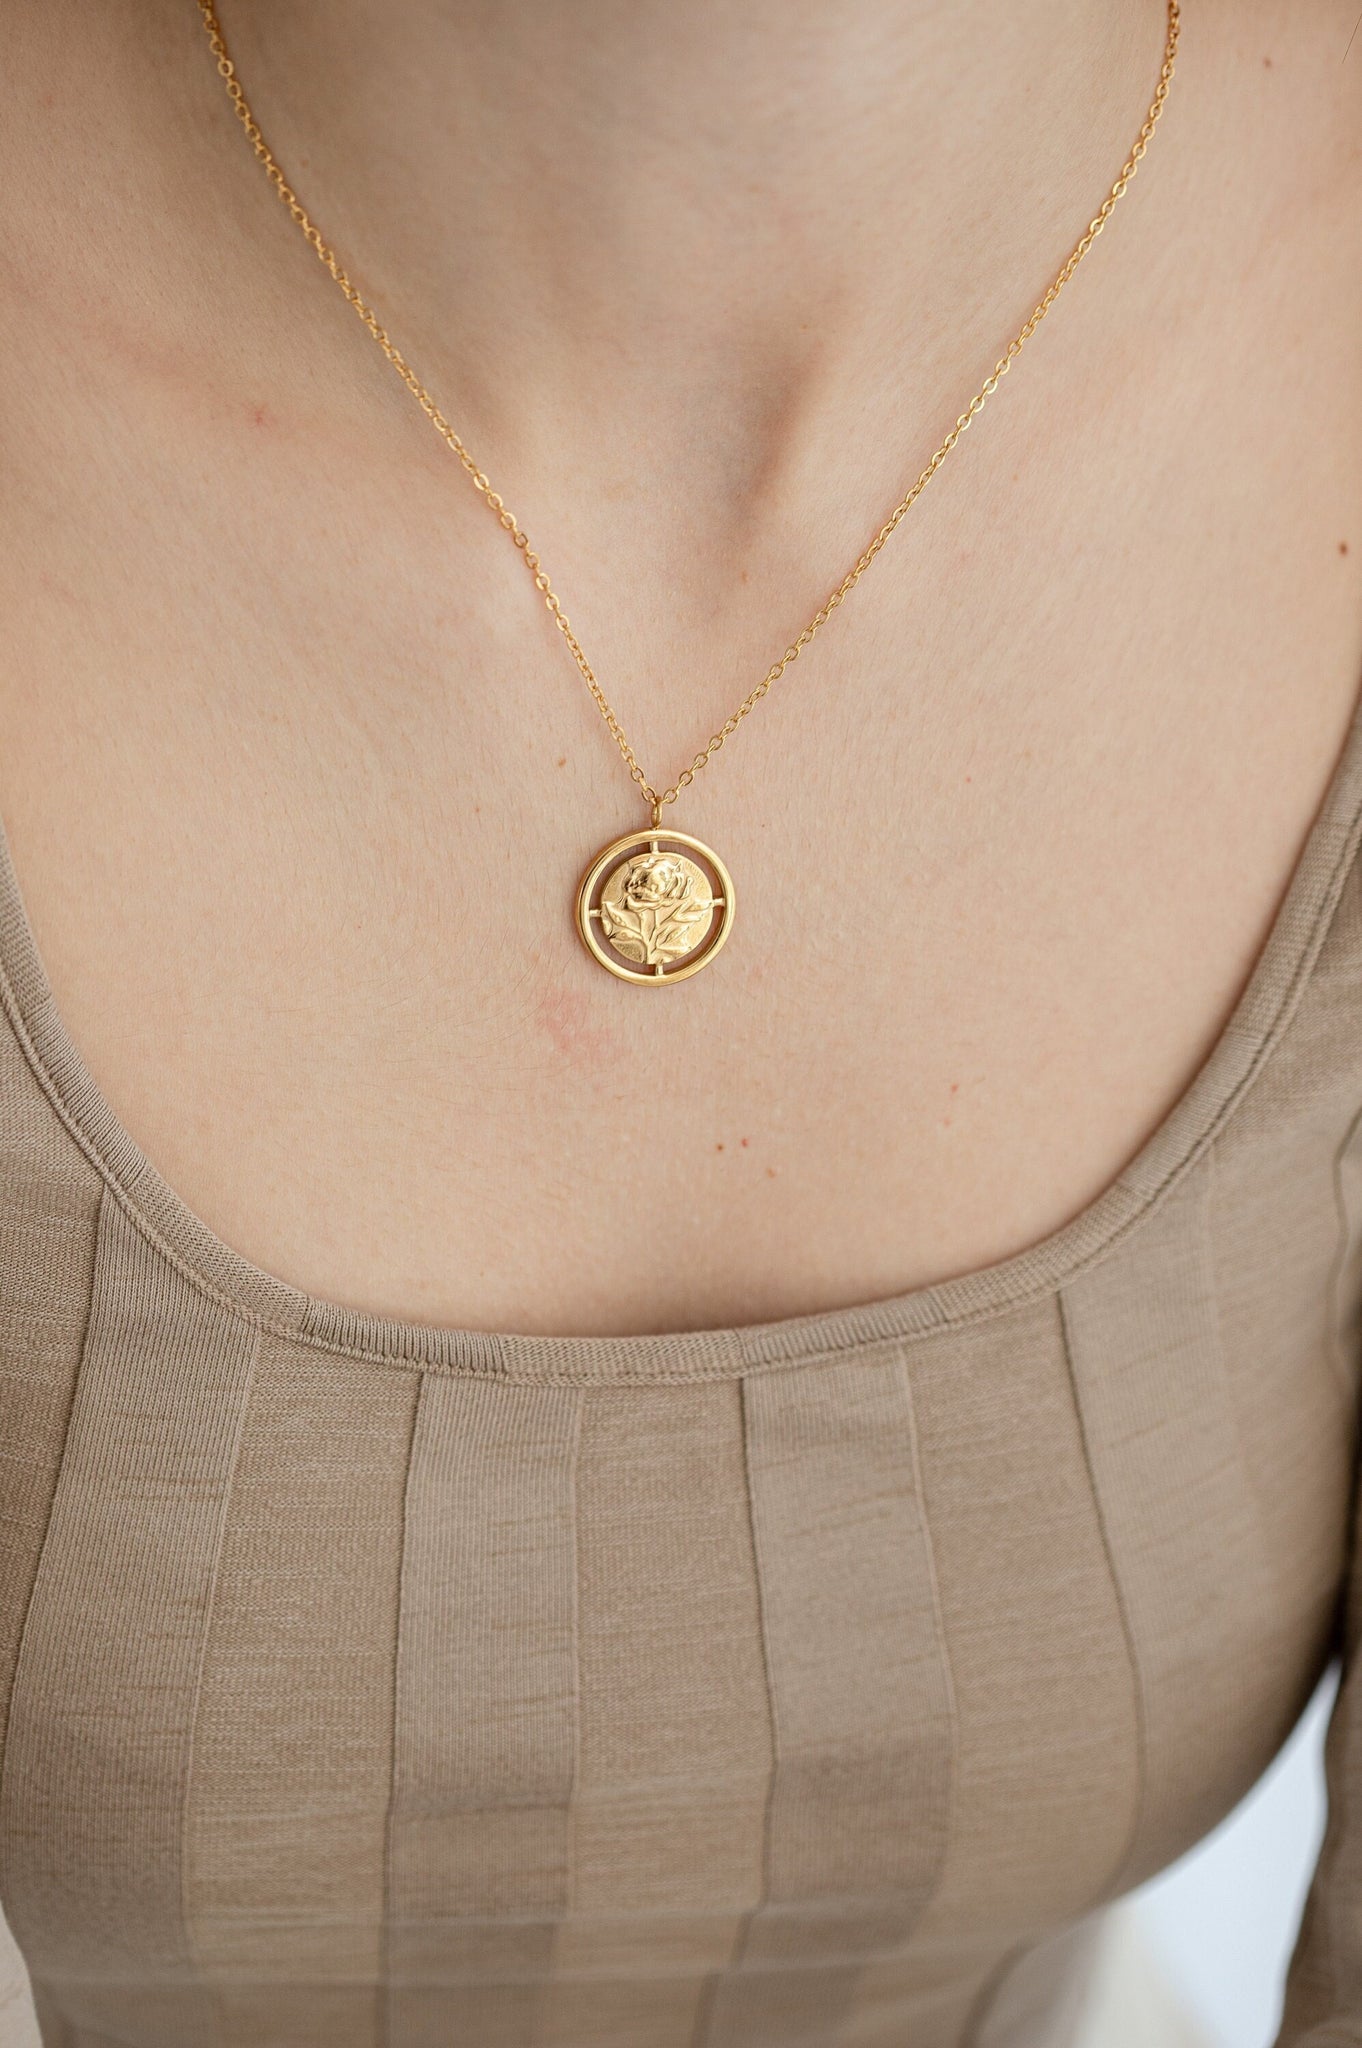 Medallion Rose Flower Necklace, 18K Gold, Mothers Day Gift, Floral Necklace, Gift For Mom, Flower Mothers Jewelry,Modern Minimalist Necklace